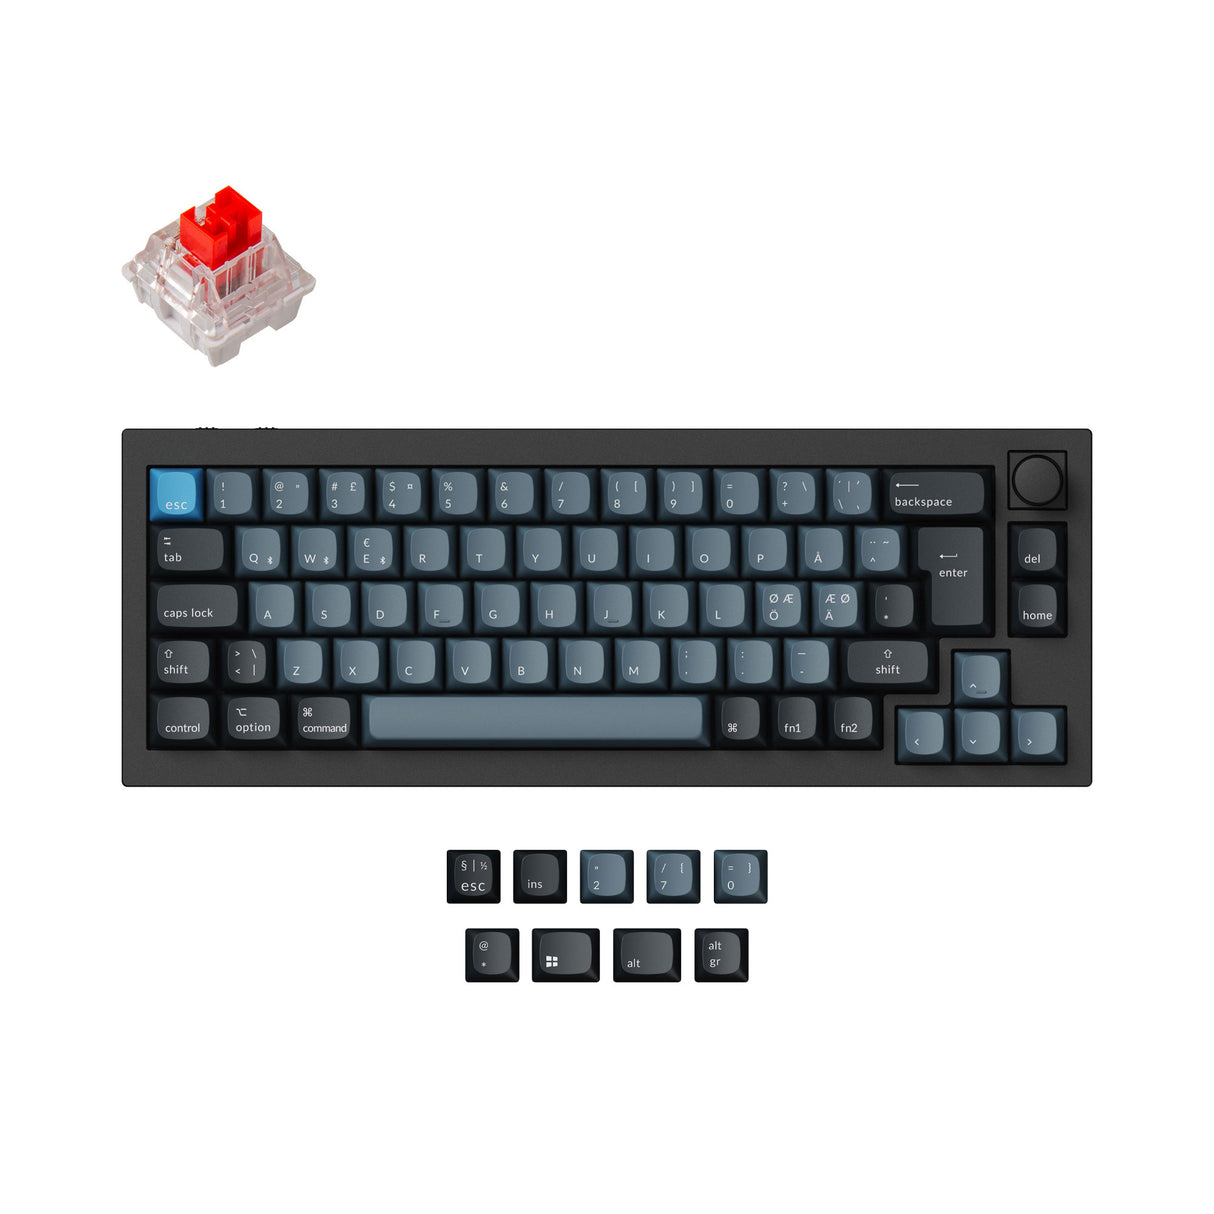 Keychron Q2 Pro QMK/VIA wireless custom mechanical keyboard 65 percent layout aluminum black for Mac WIndows Linux RGB backlight hot-swappable K Pro switch red ISO Nordic layout